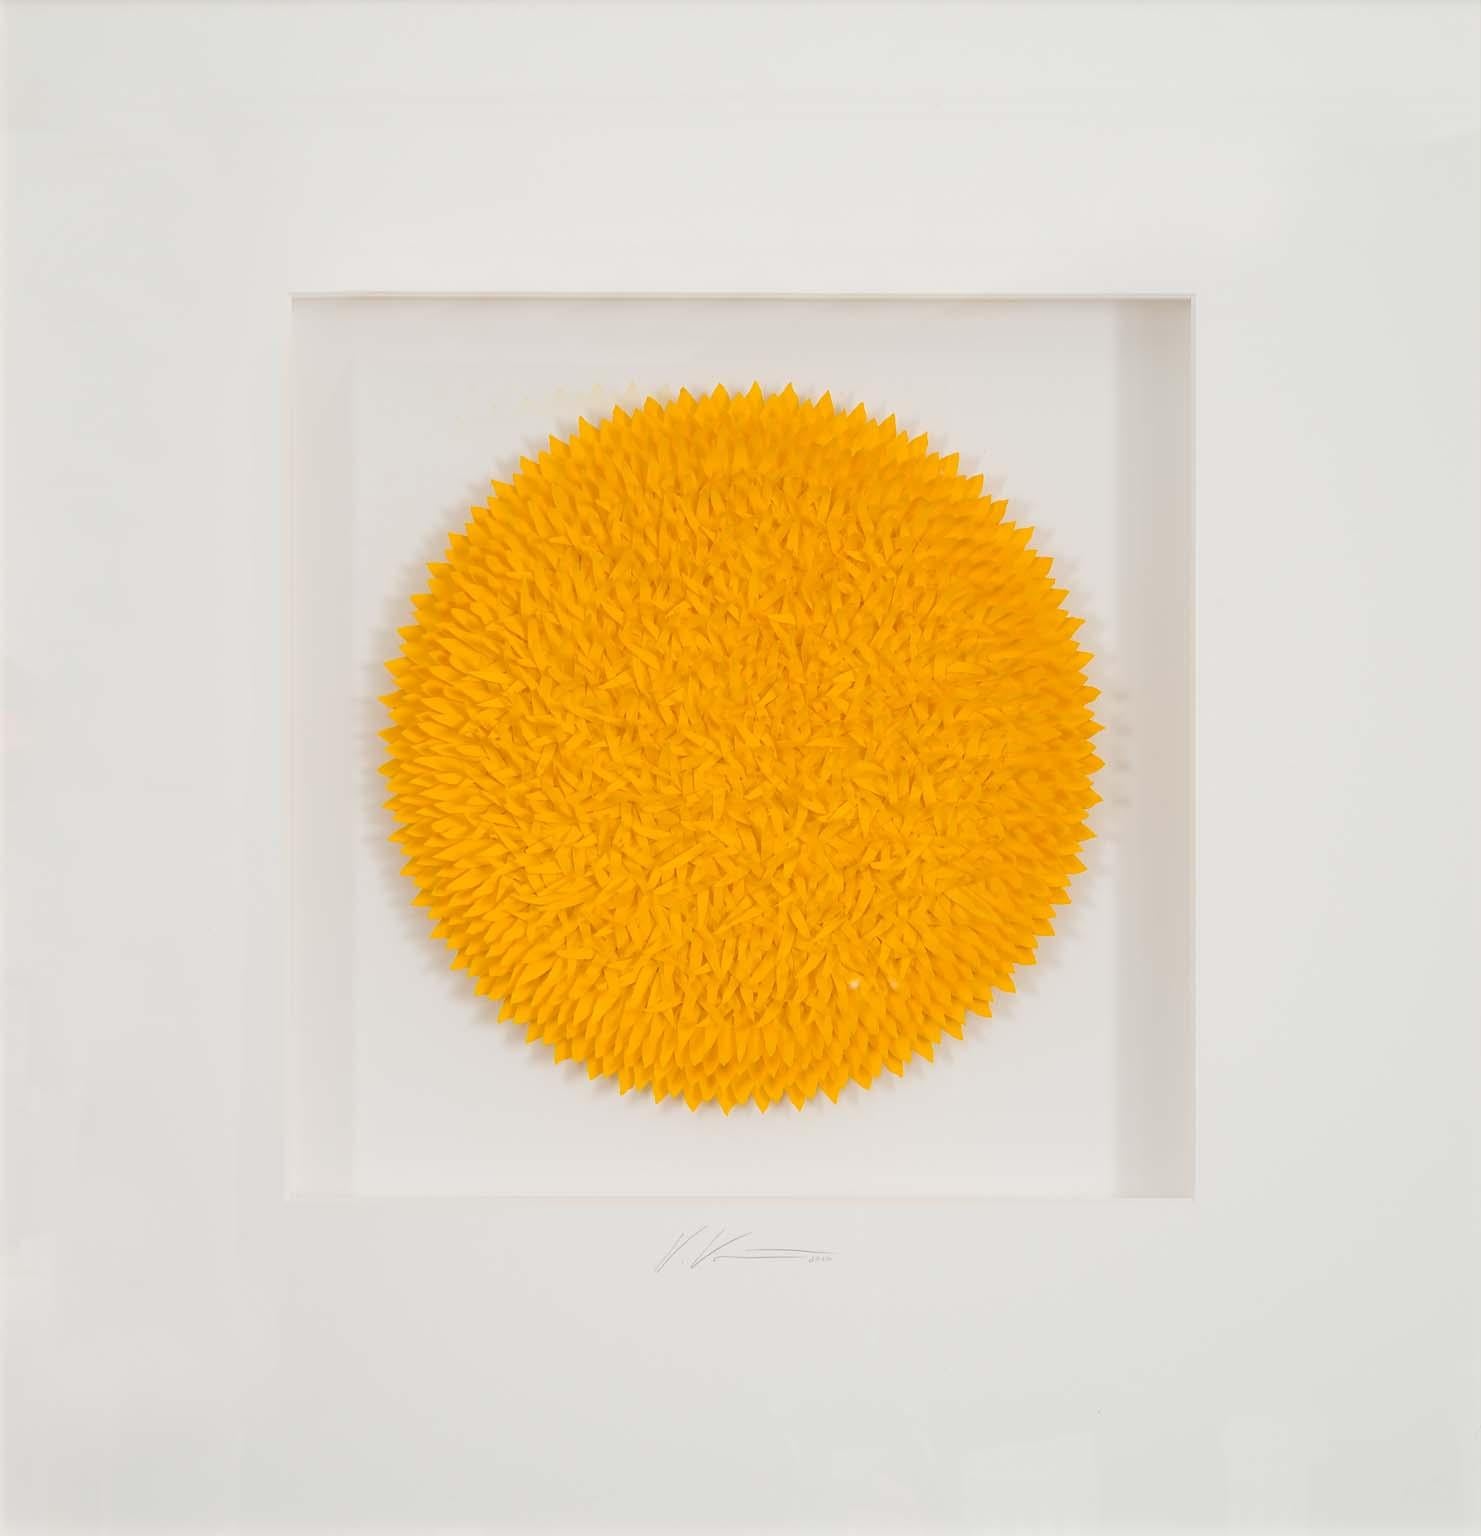 Assemblage Yellow-three dimensional modern art work from handmade paper abstract - Mixed Media Art by Volker Kuhn